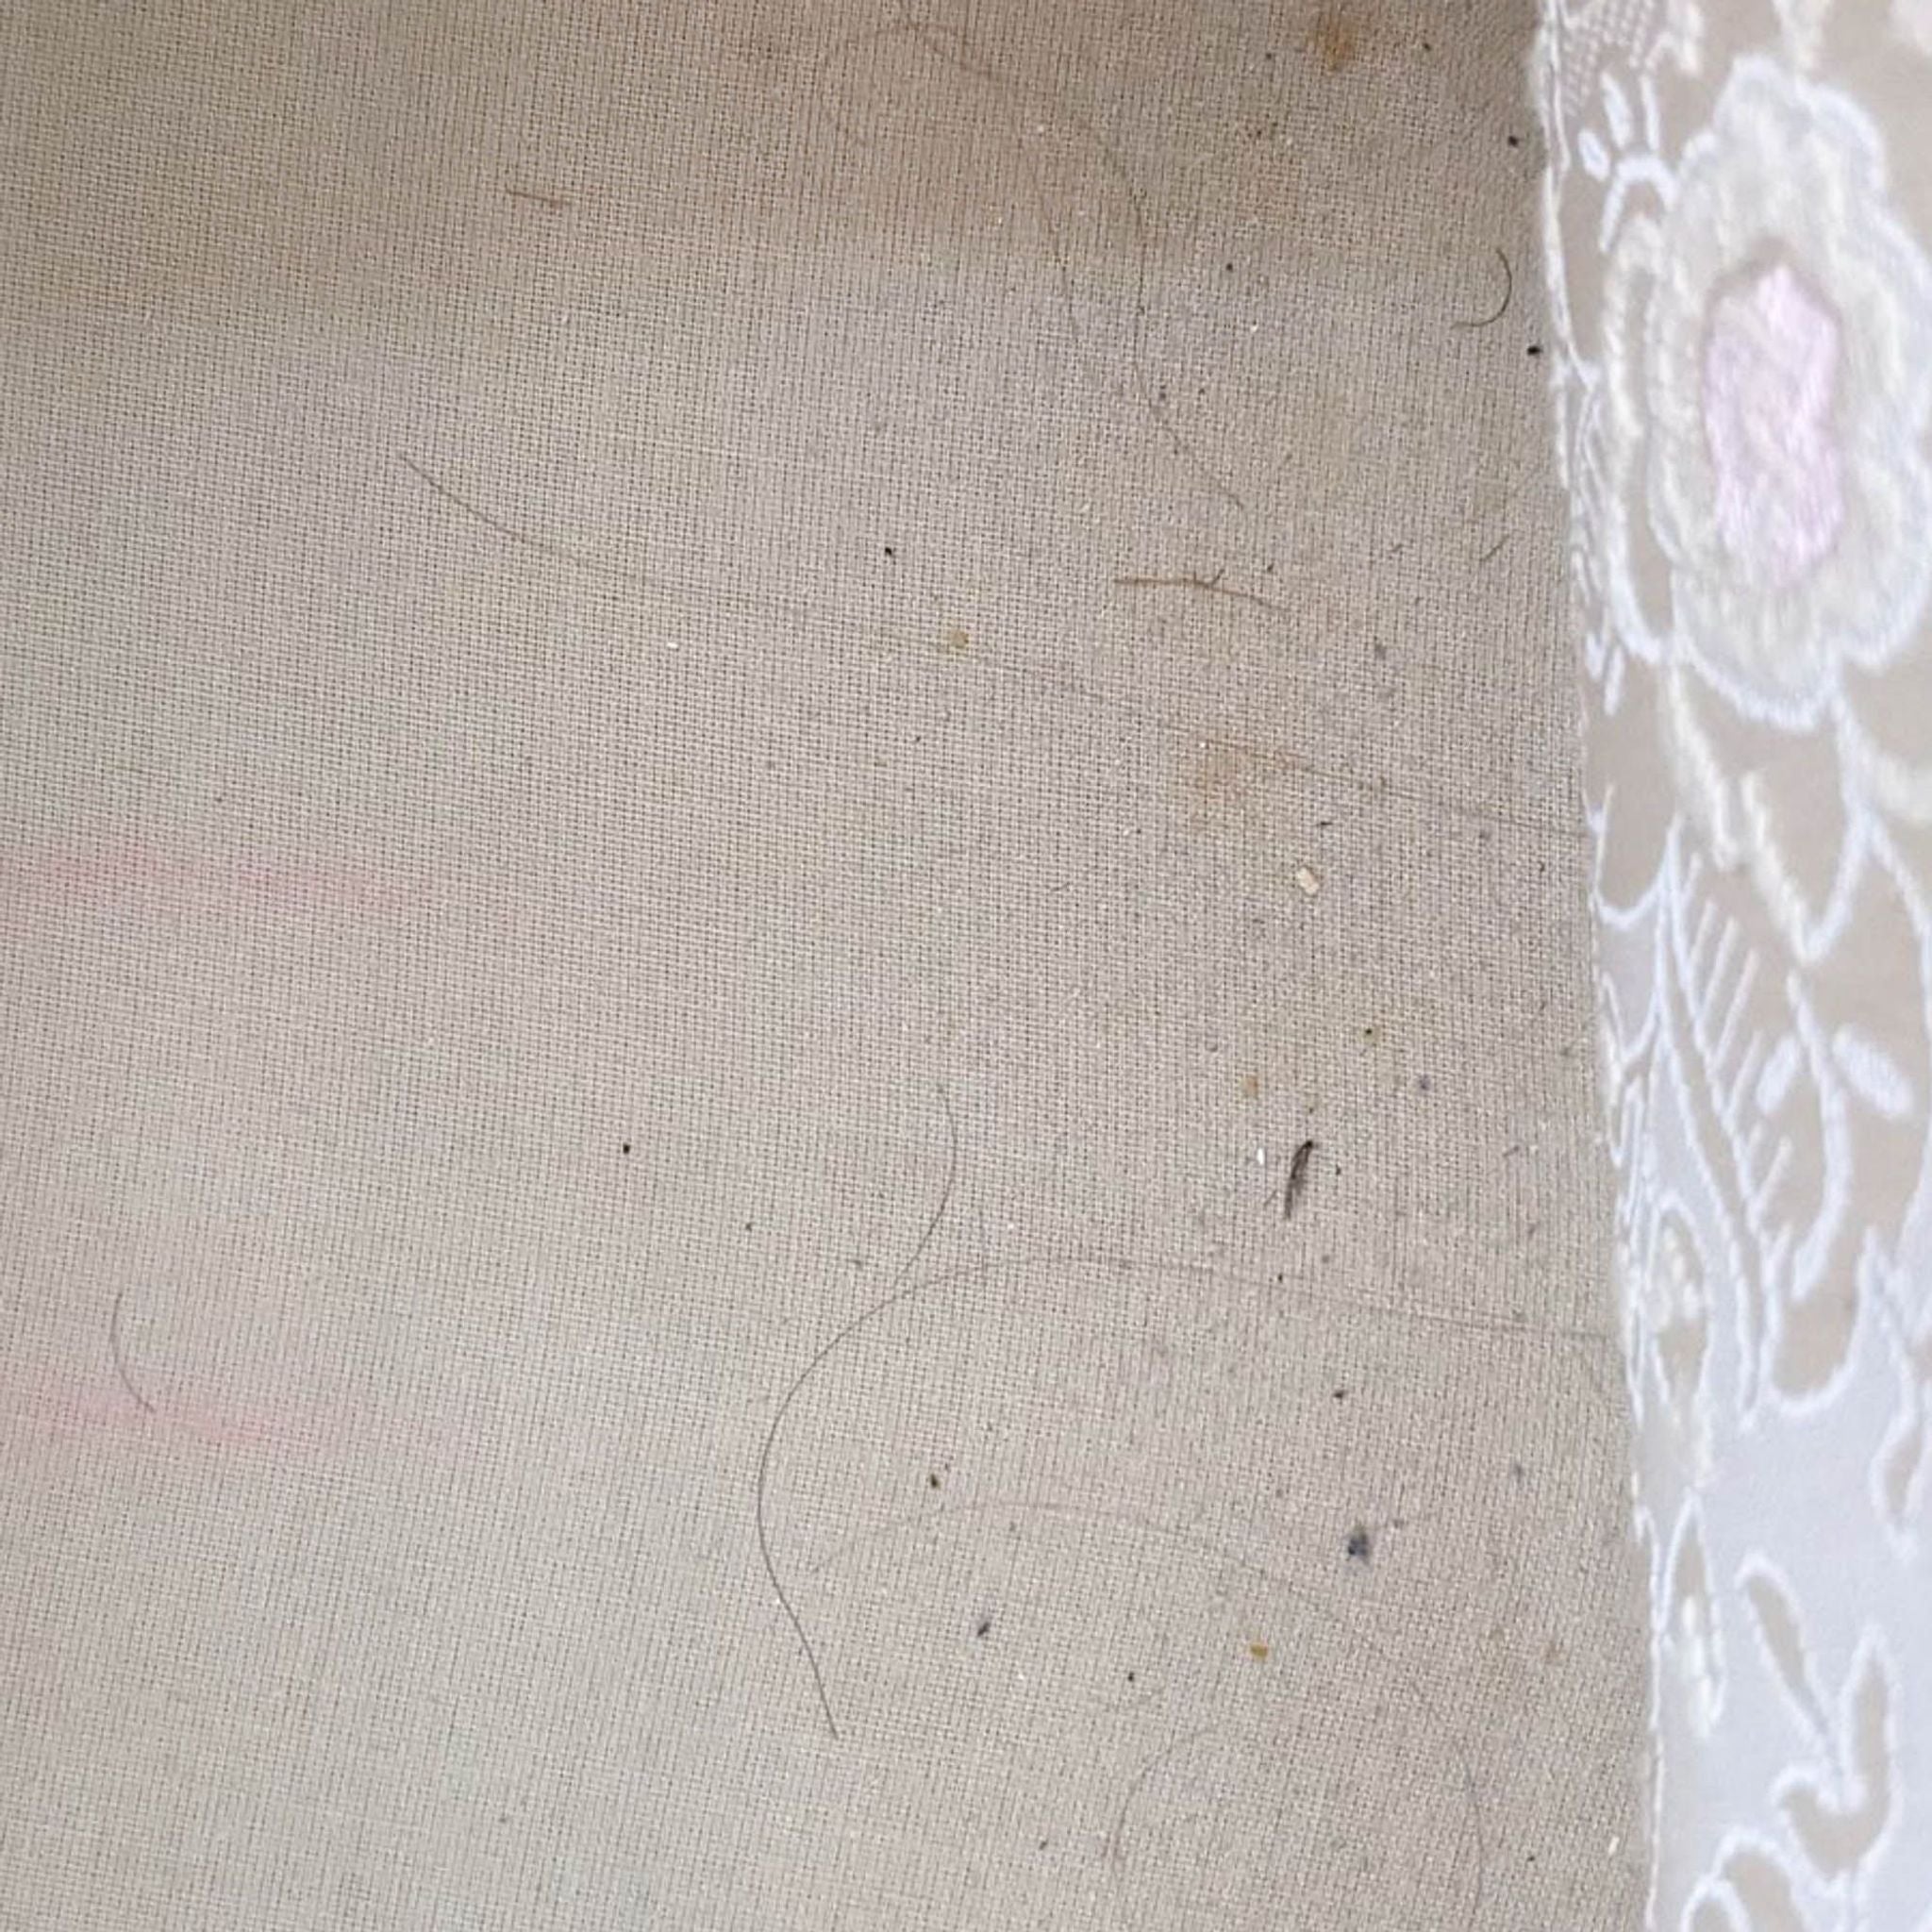 2. Close-up of a vintage armchair’s fabric showing wear and stains on the beige embossed upholstery.